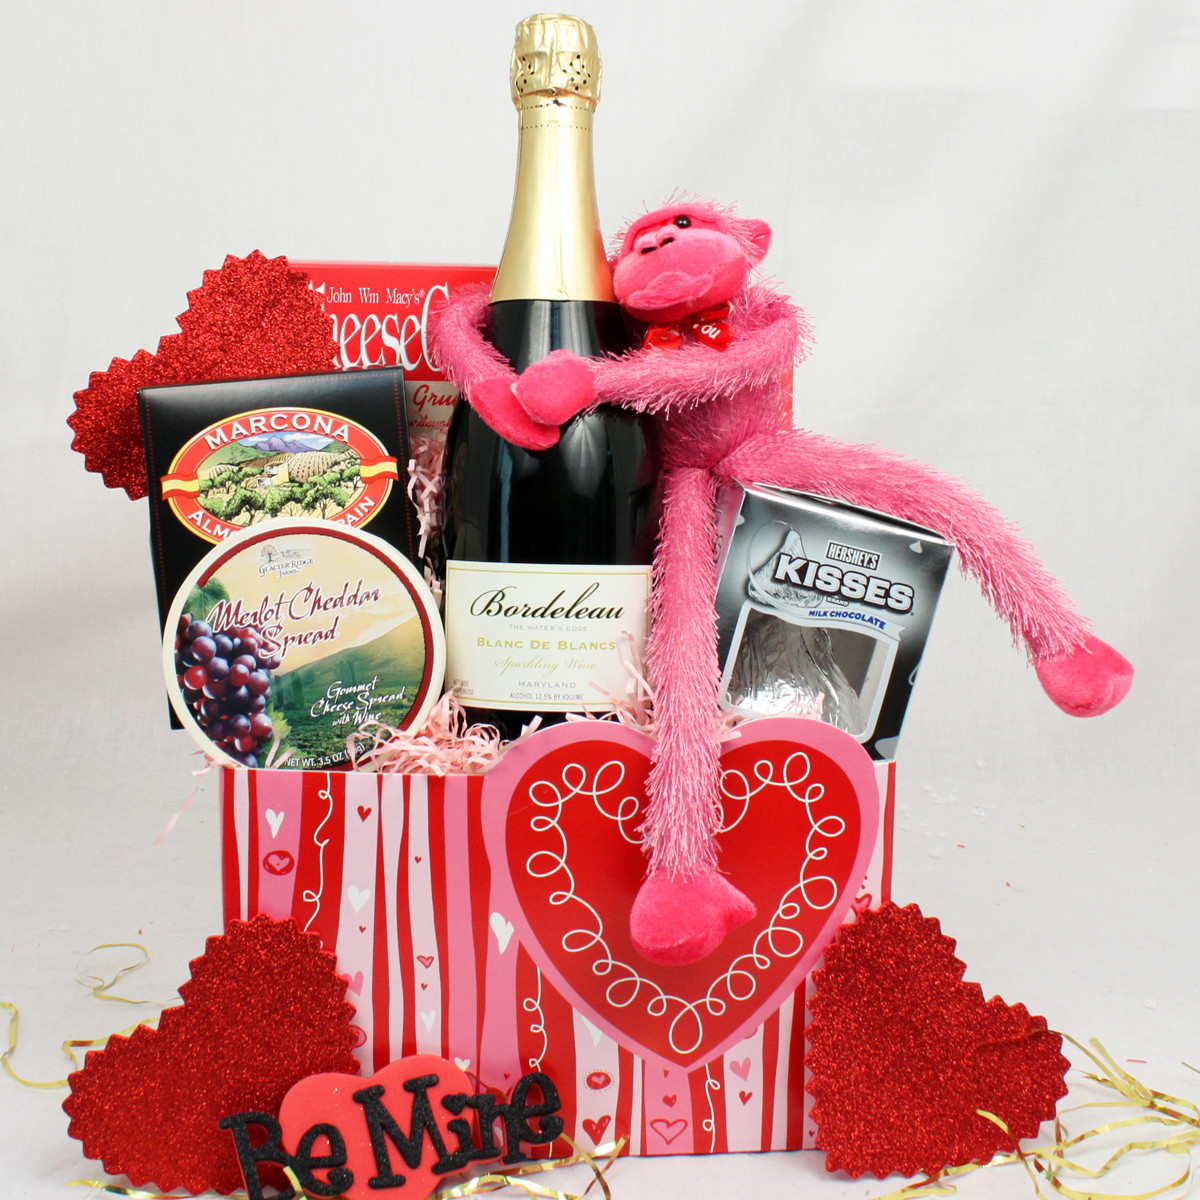 Valentines Ideas Gift
 Creative and Thoughtful Valentine’s Day Gifts for Her